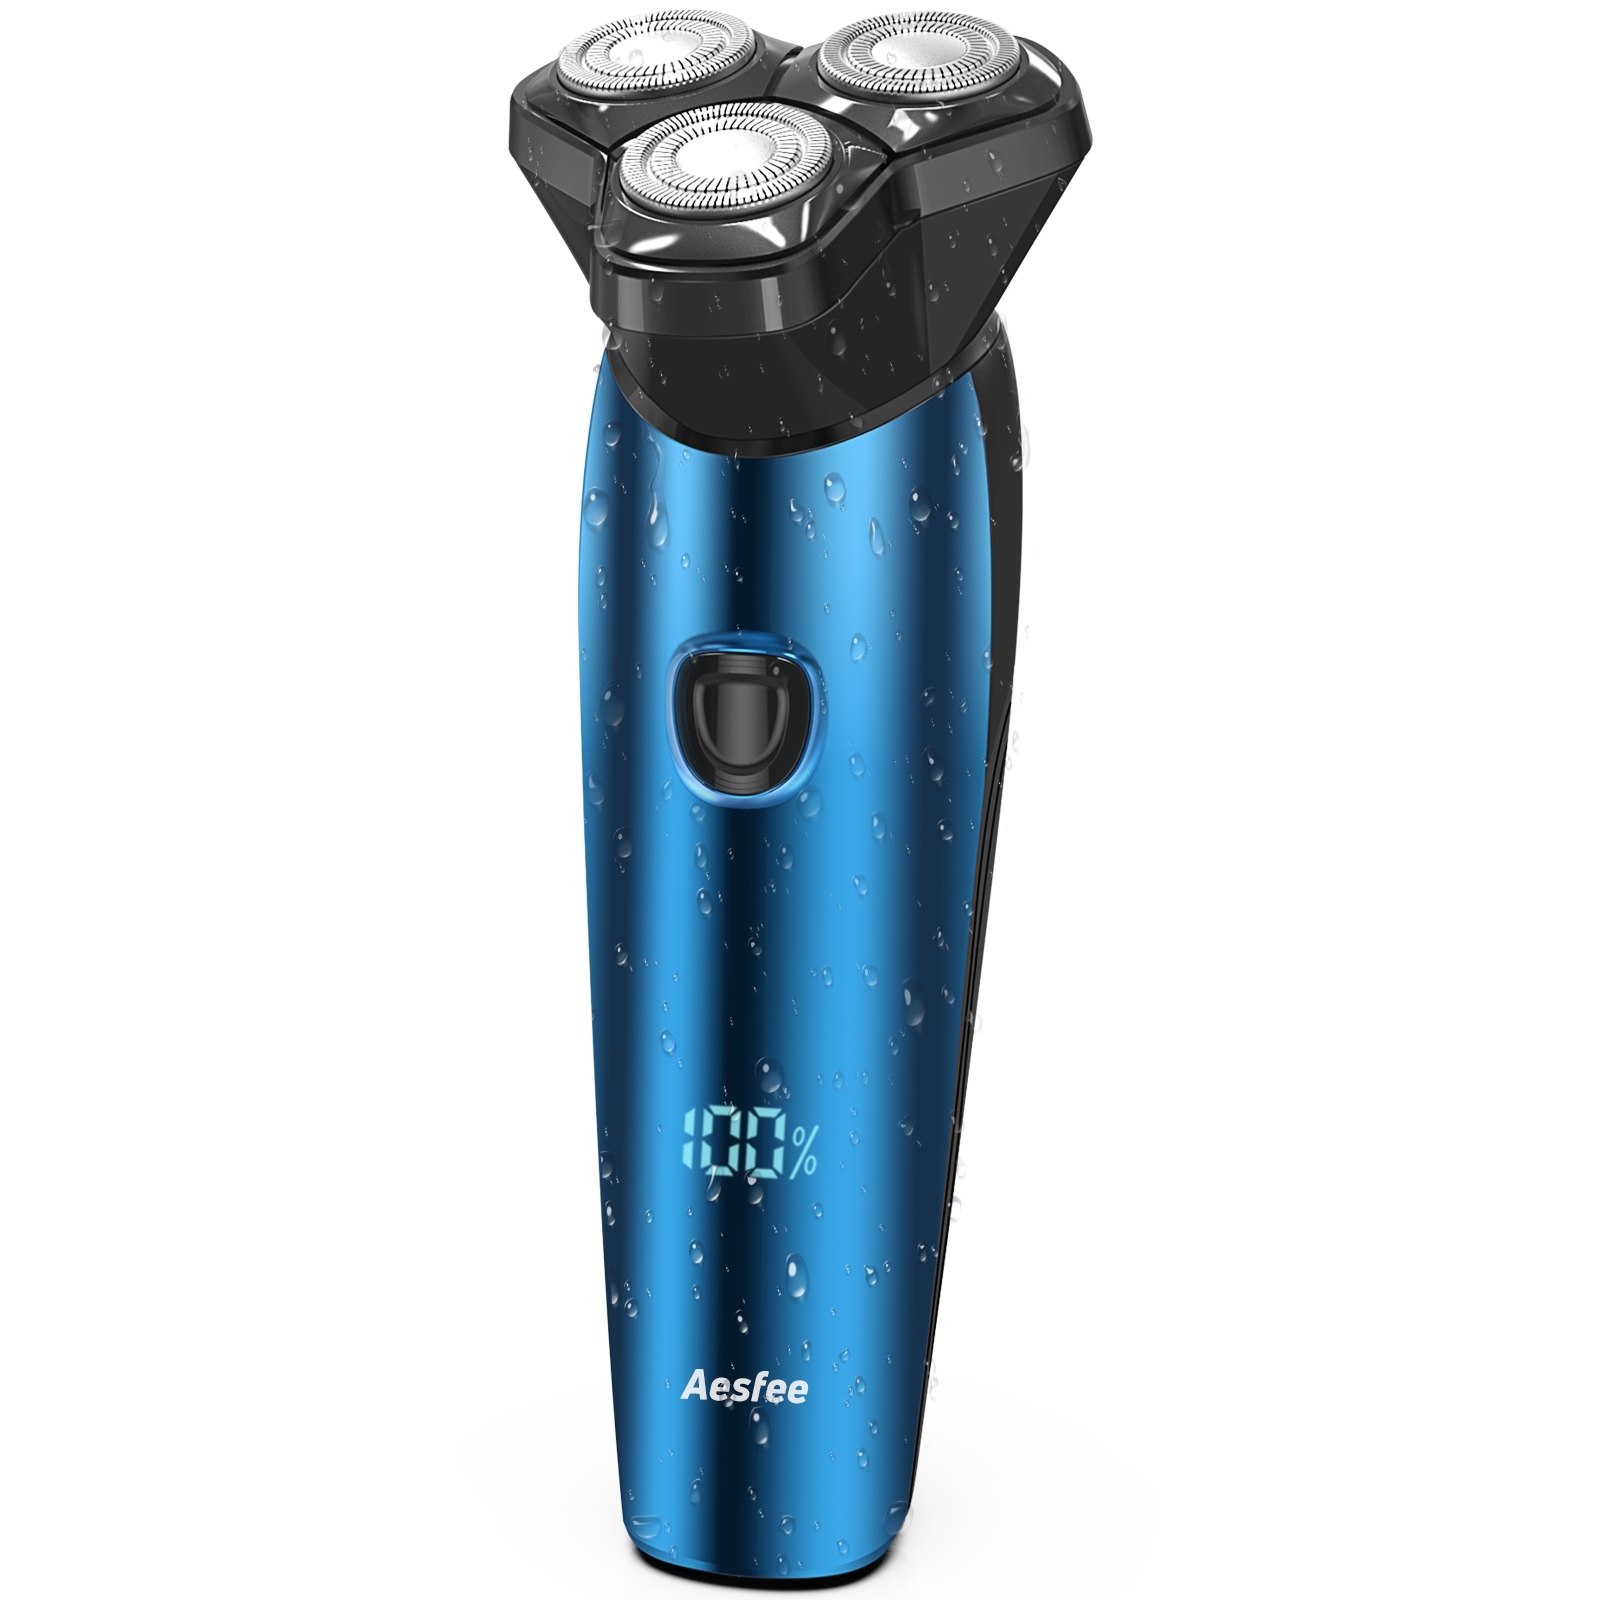 Electric Shaver 3D Rotary Razor for Men ,Wet and Dry IPX7 Waterproof Rechargeable with Pop-up Trimmer, Digital Indicator - Blue